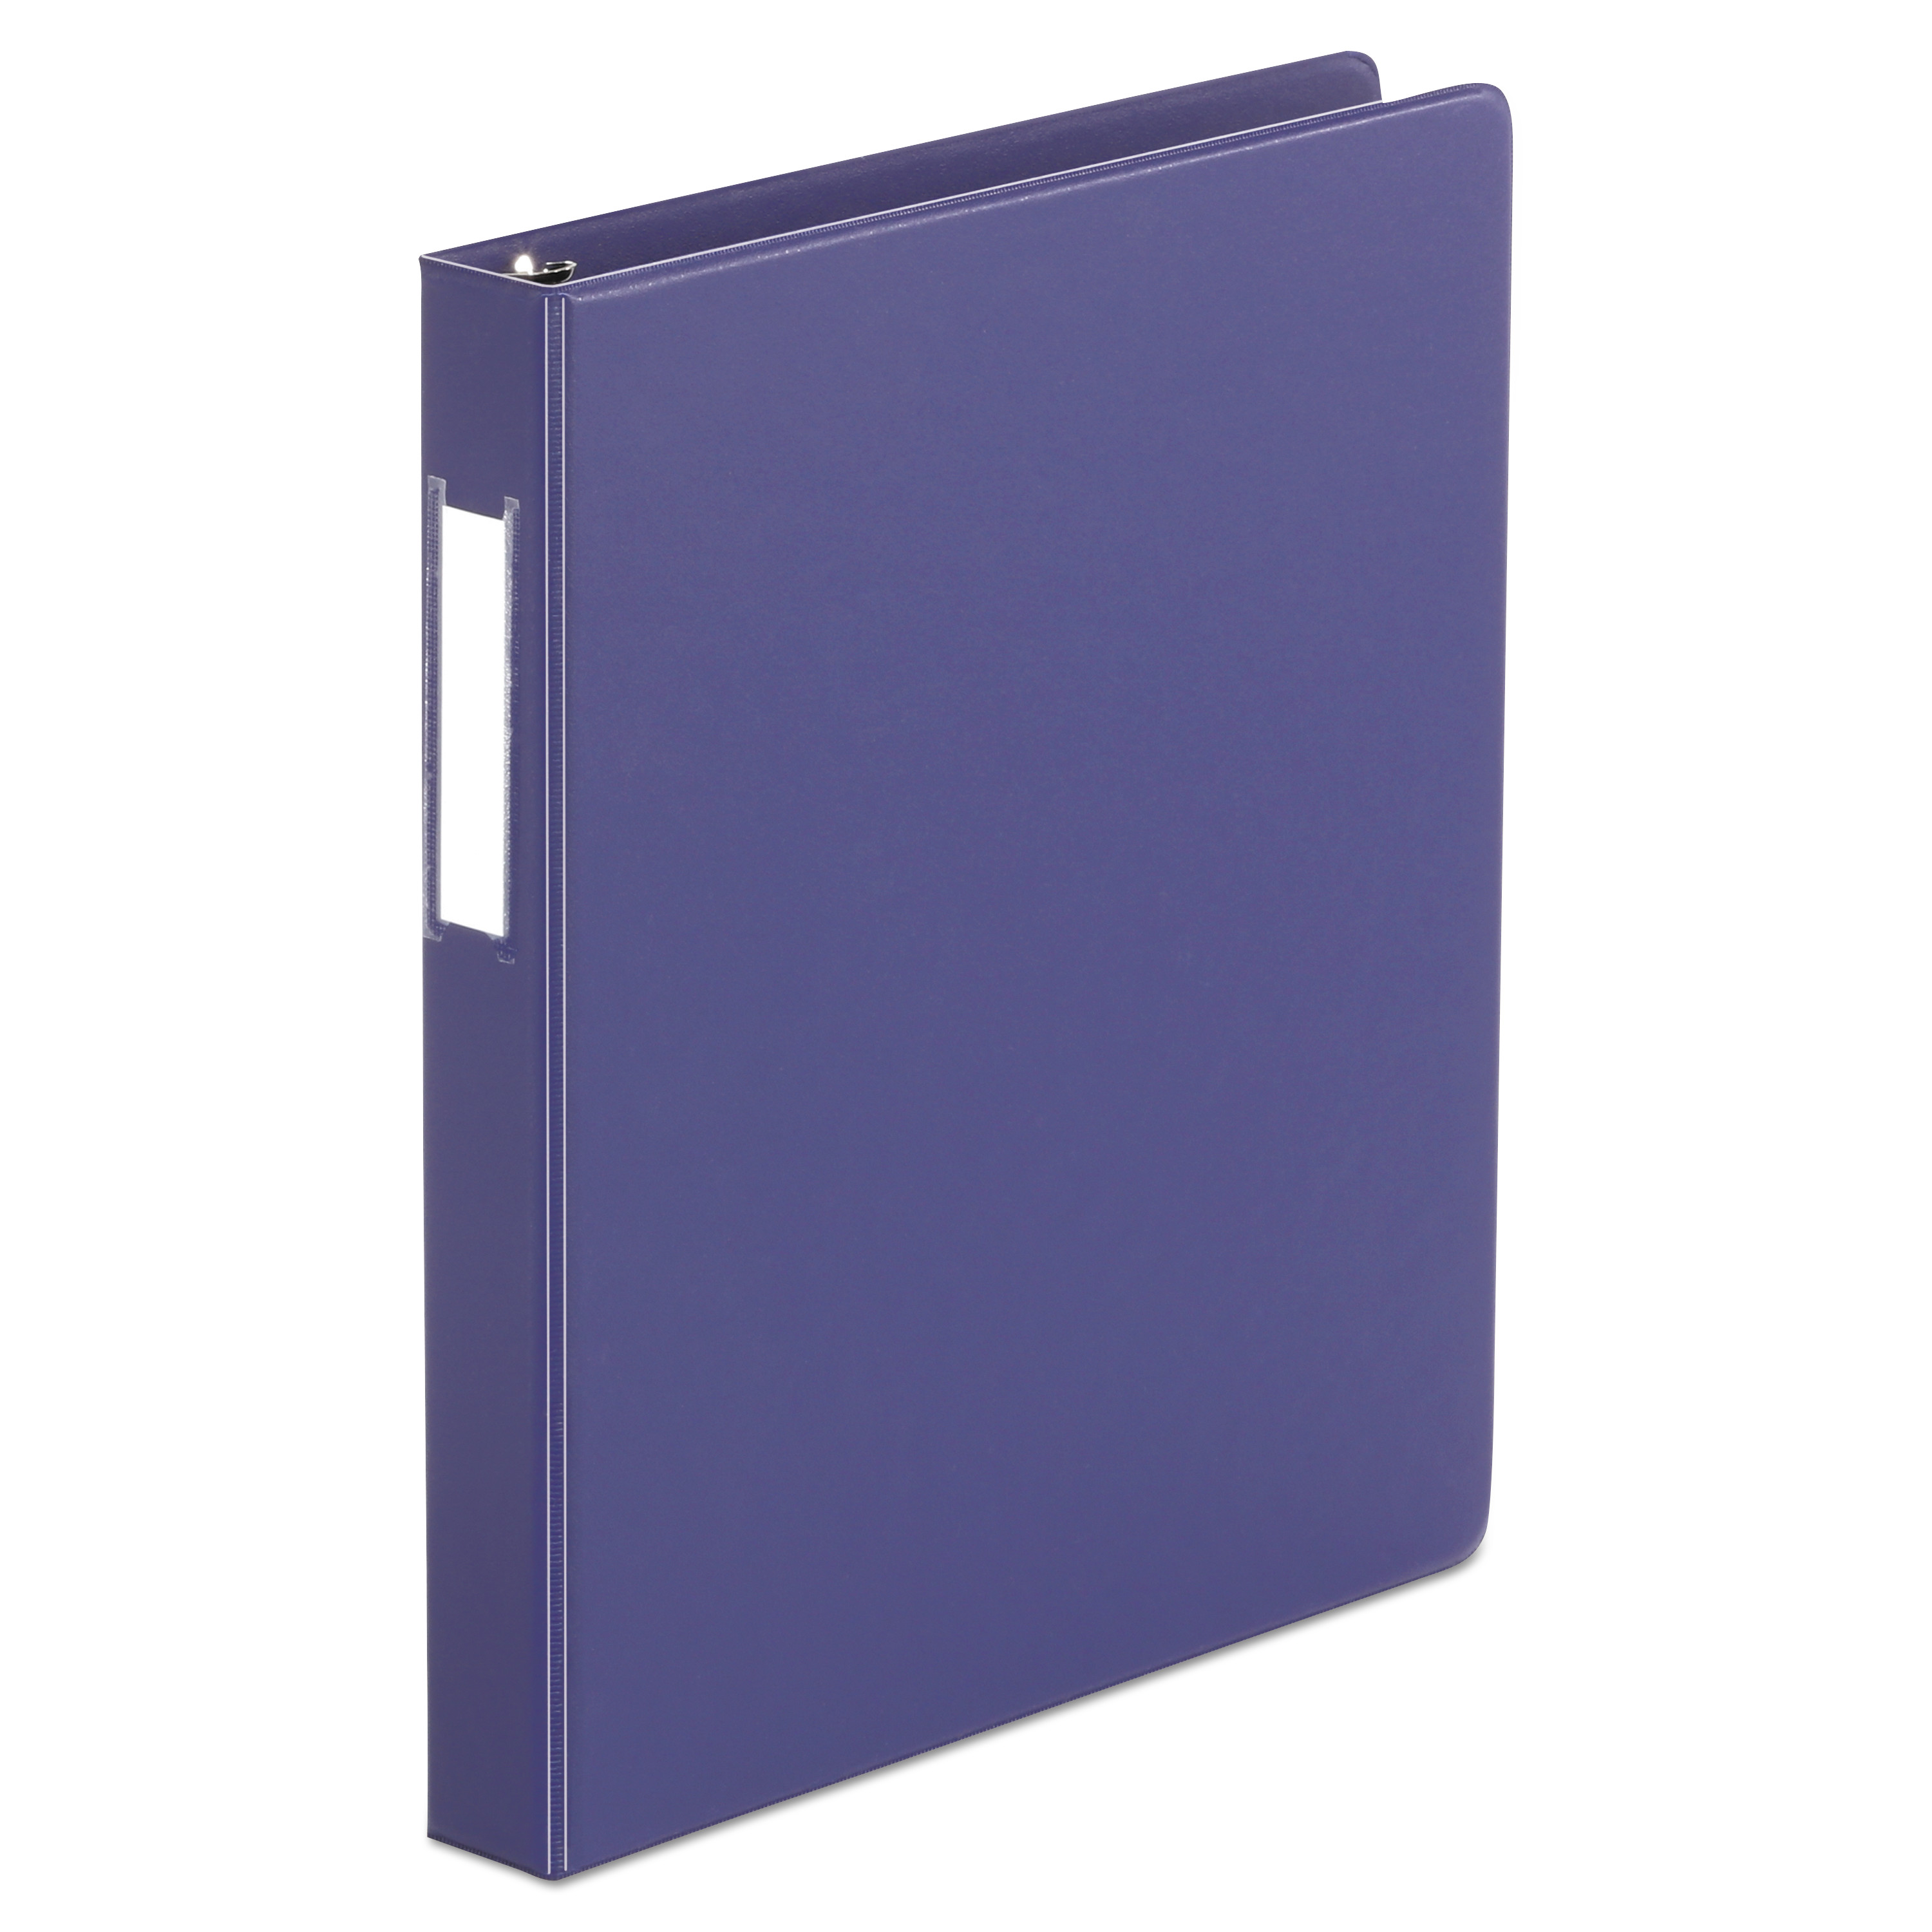  Universal UNV20768 Deluxe Non-View D-Ring Binder with Label Holder, 3 Rings, 1 Capacity, 11 x 8.5, Navy Blue (UNV20768) 